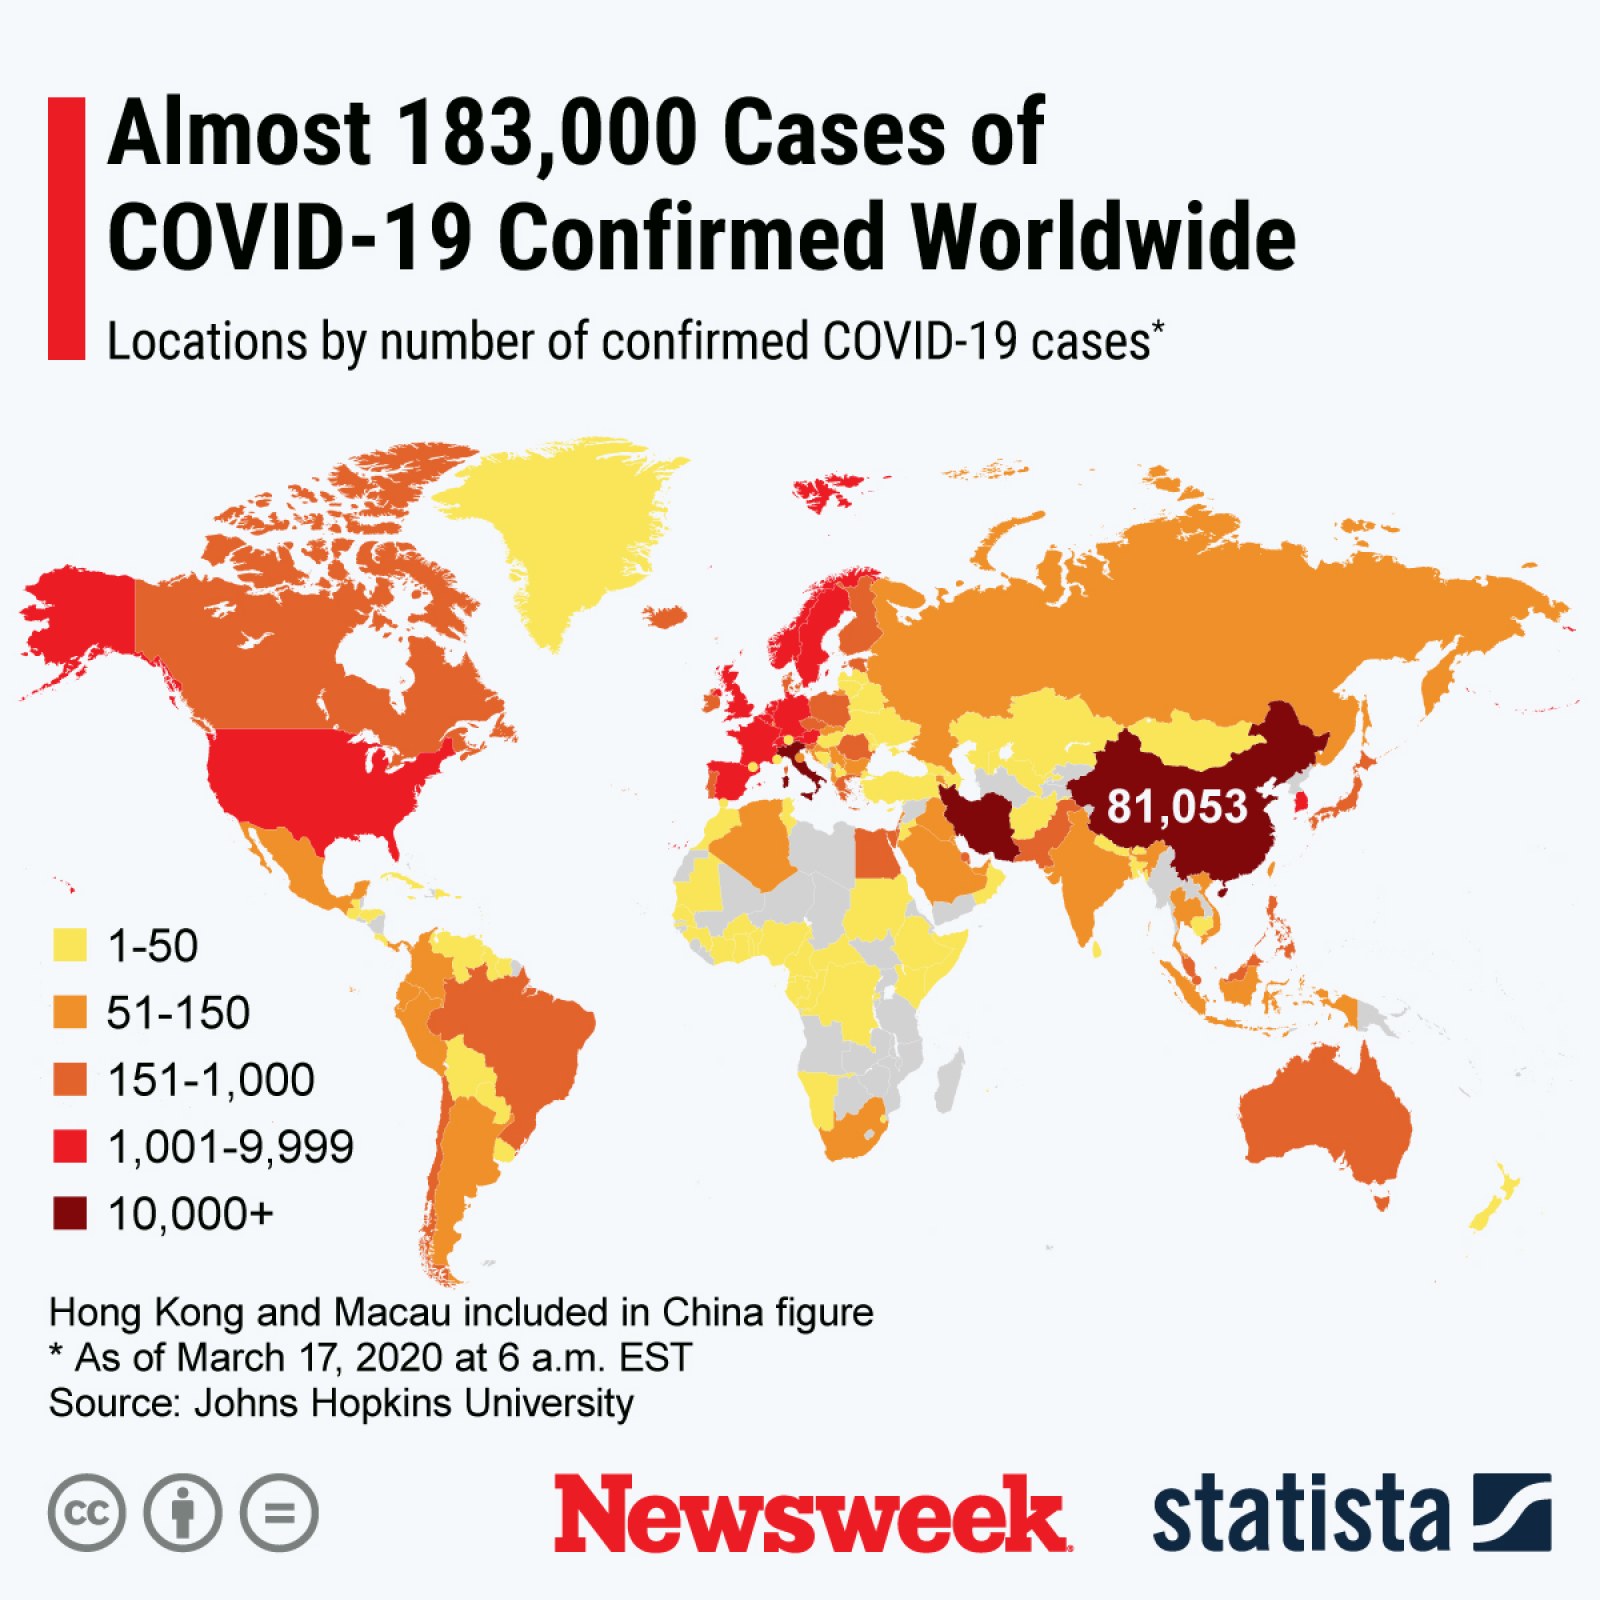 Covid Update World : A distribution map and a timeline with a list of ...